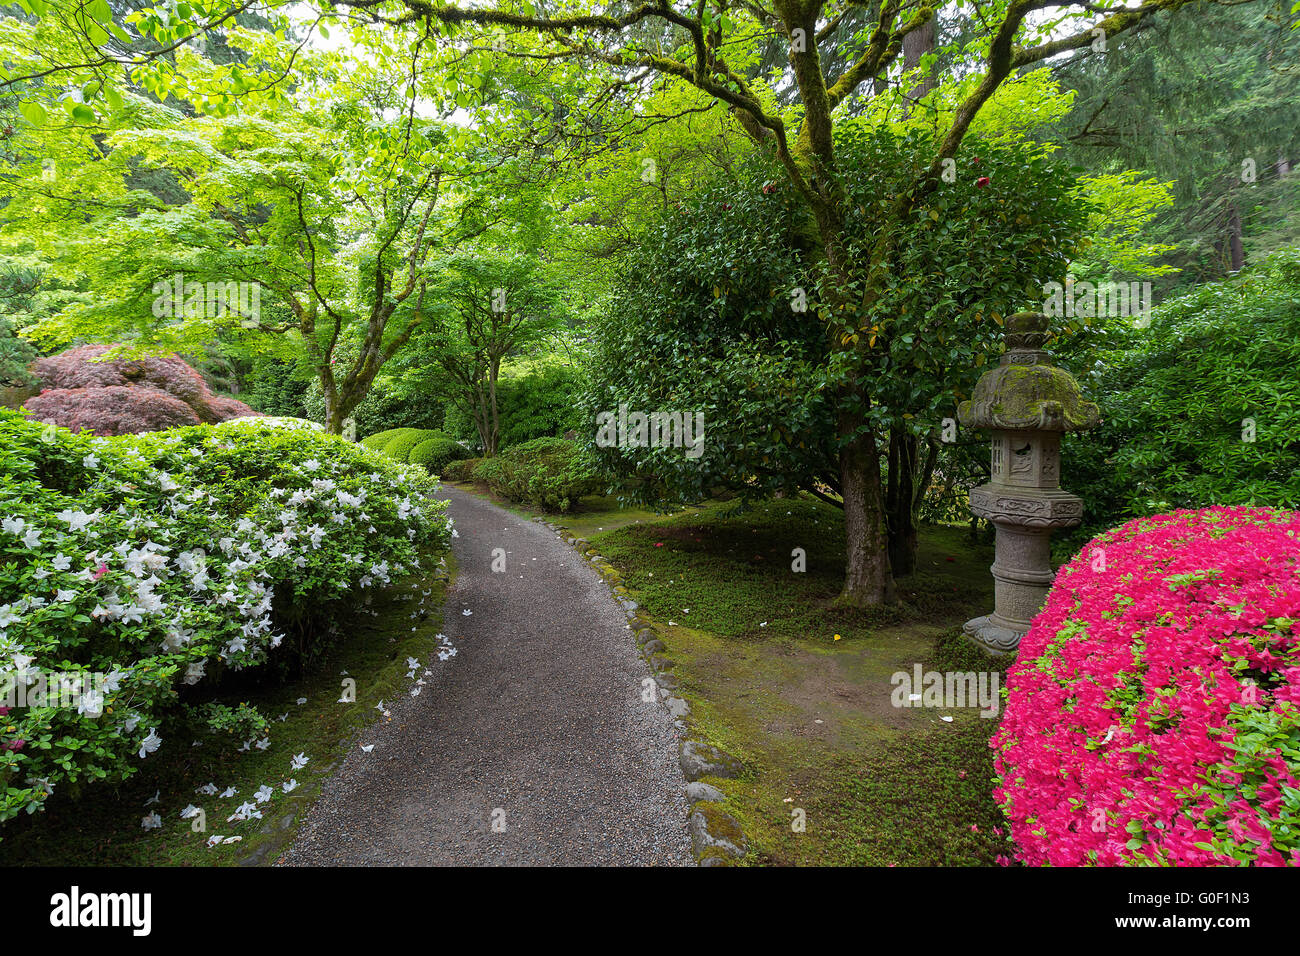 Garden Path with stone lantern plants and flowers at Japanese Garden Stock Photo